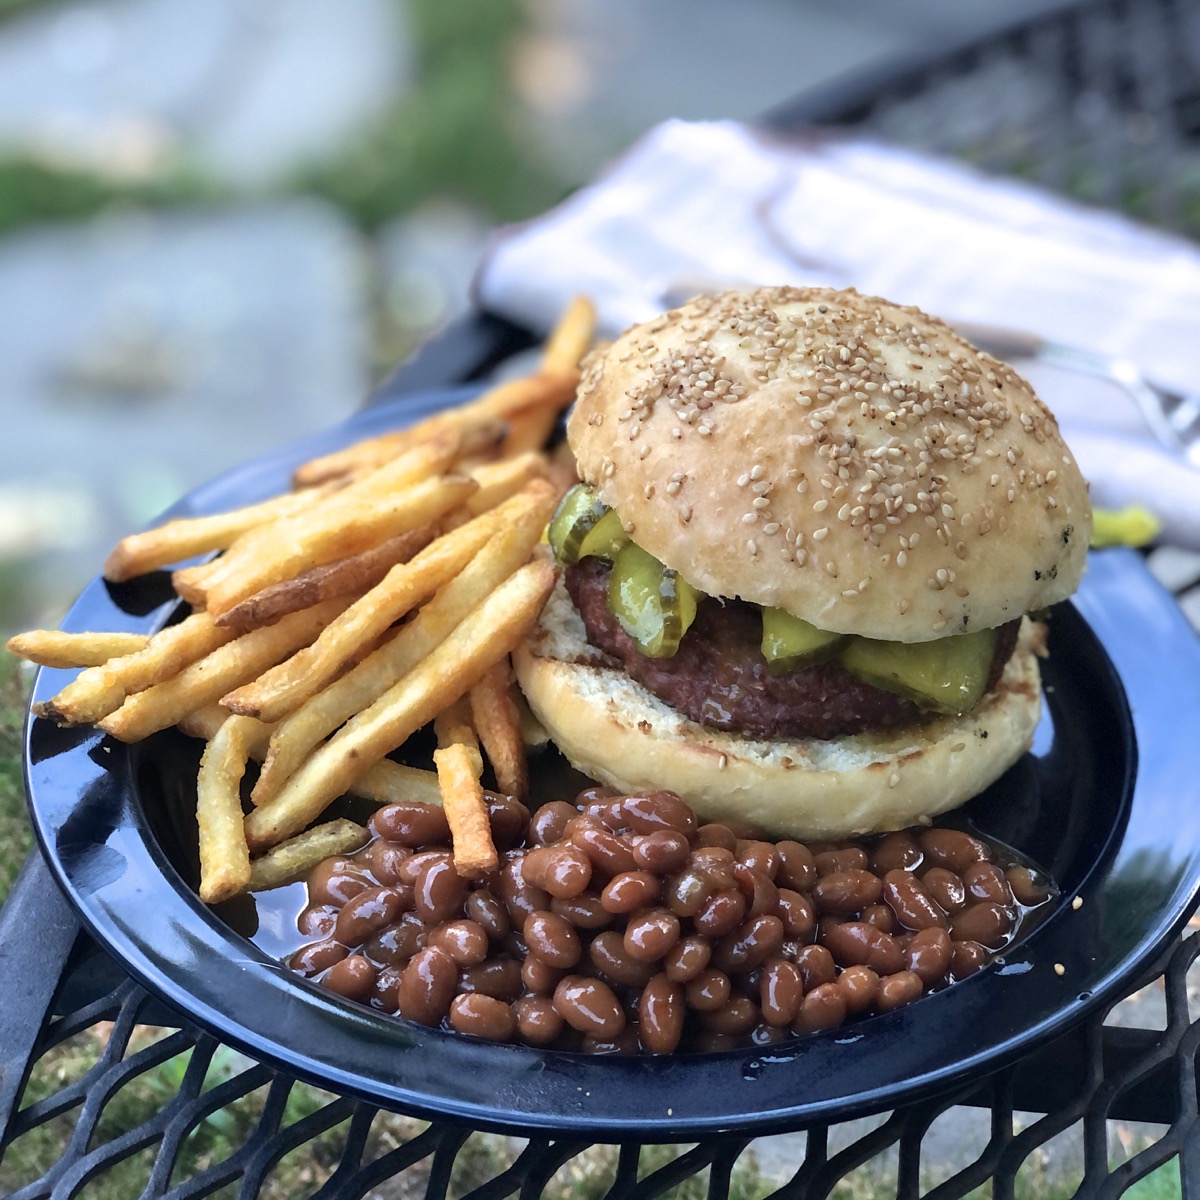 A burger in a bun with pickles, baked beans and fries on the side, on a blue plate on a picnic table.